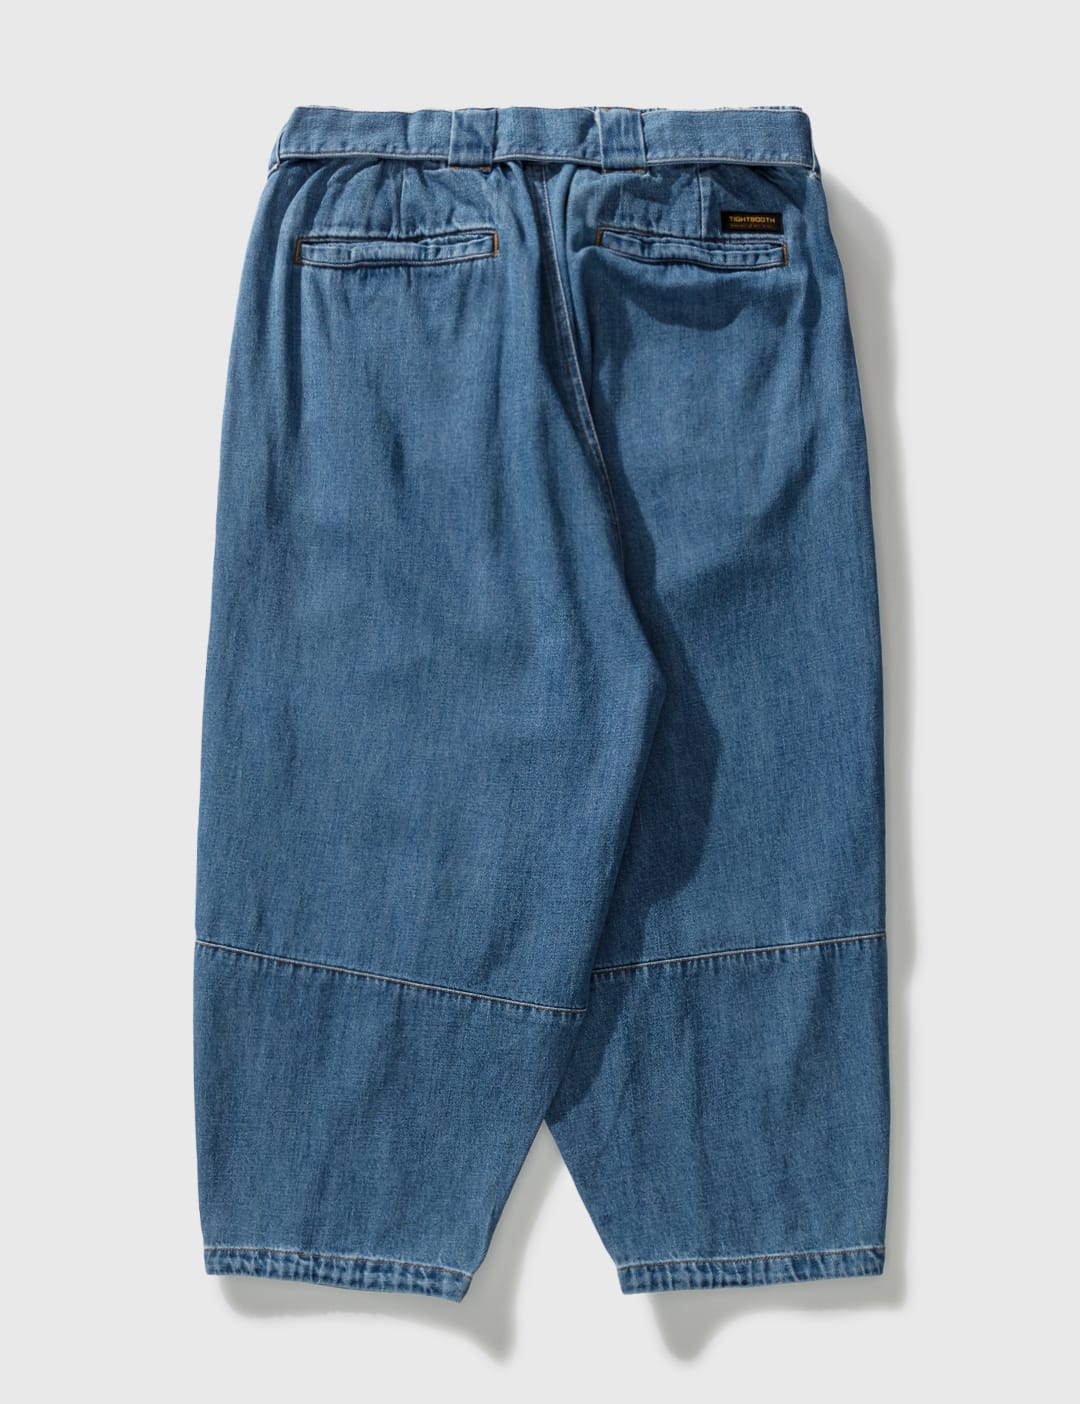 TIGHTBOOTH - DENIM CROPPED PANTS | HBX - Globally Curated Fashion